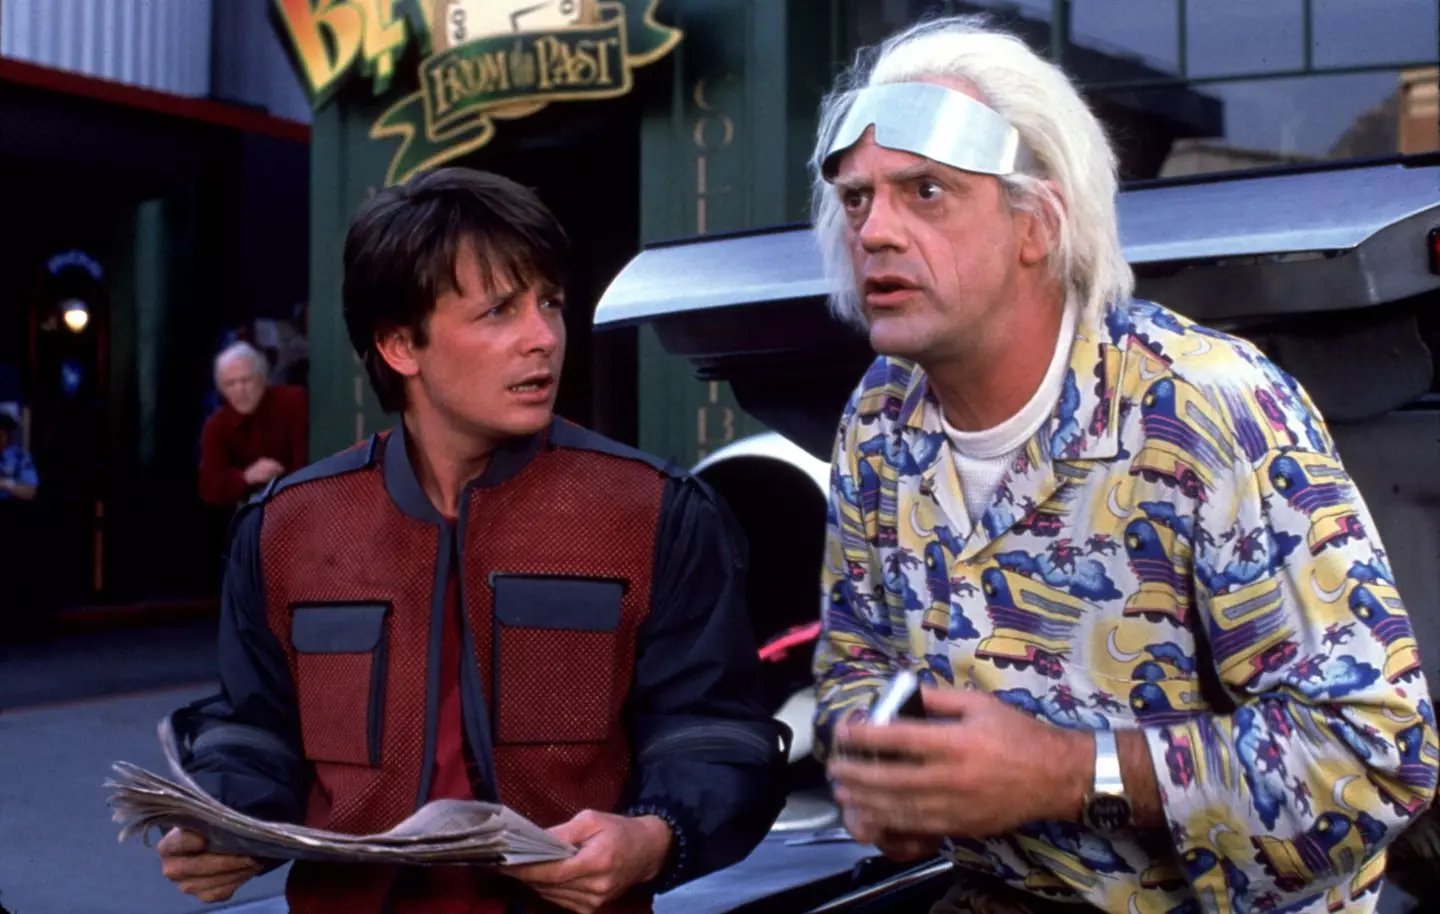 The two starred alongside one another in the Back to the Future franchise.